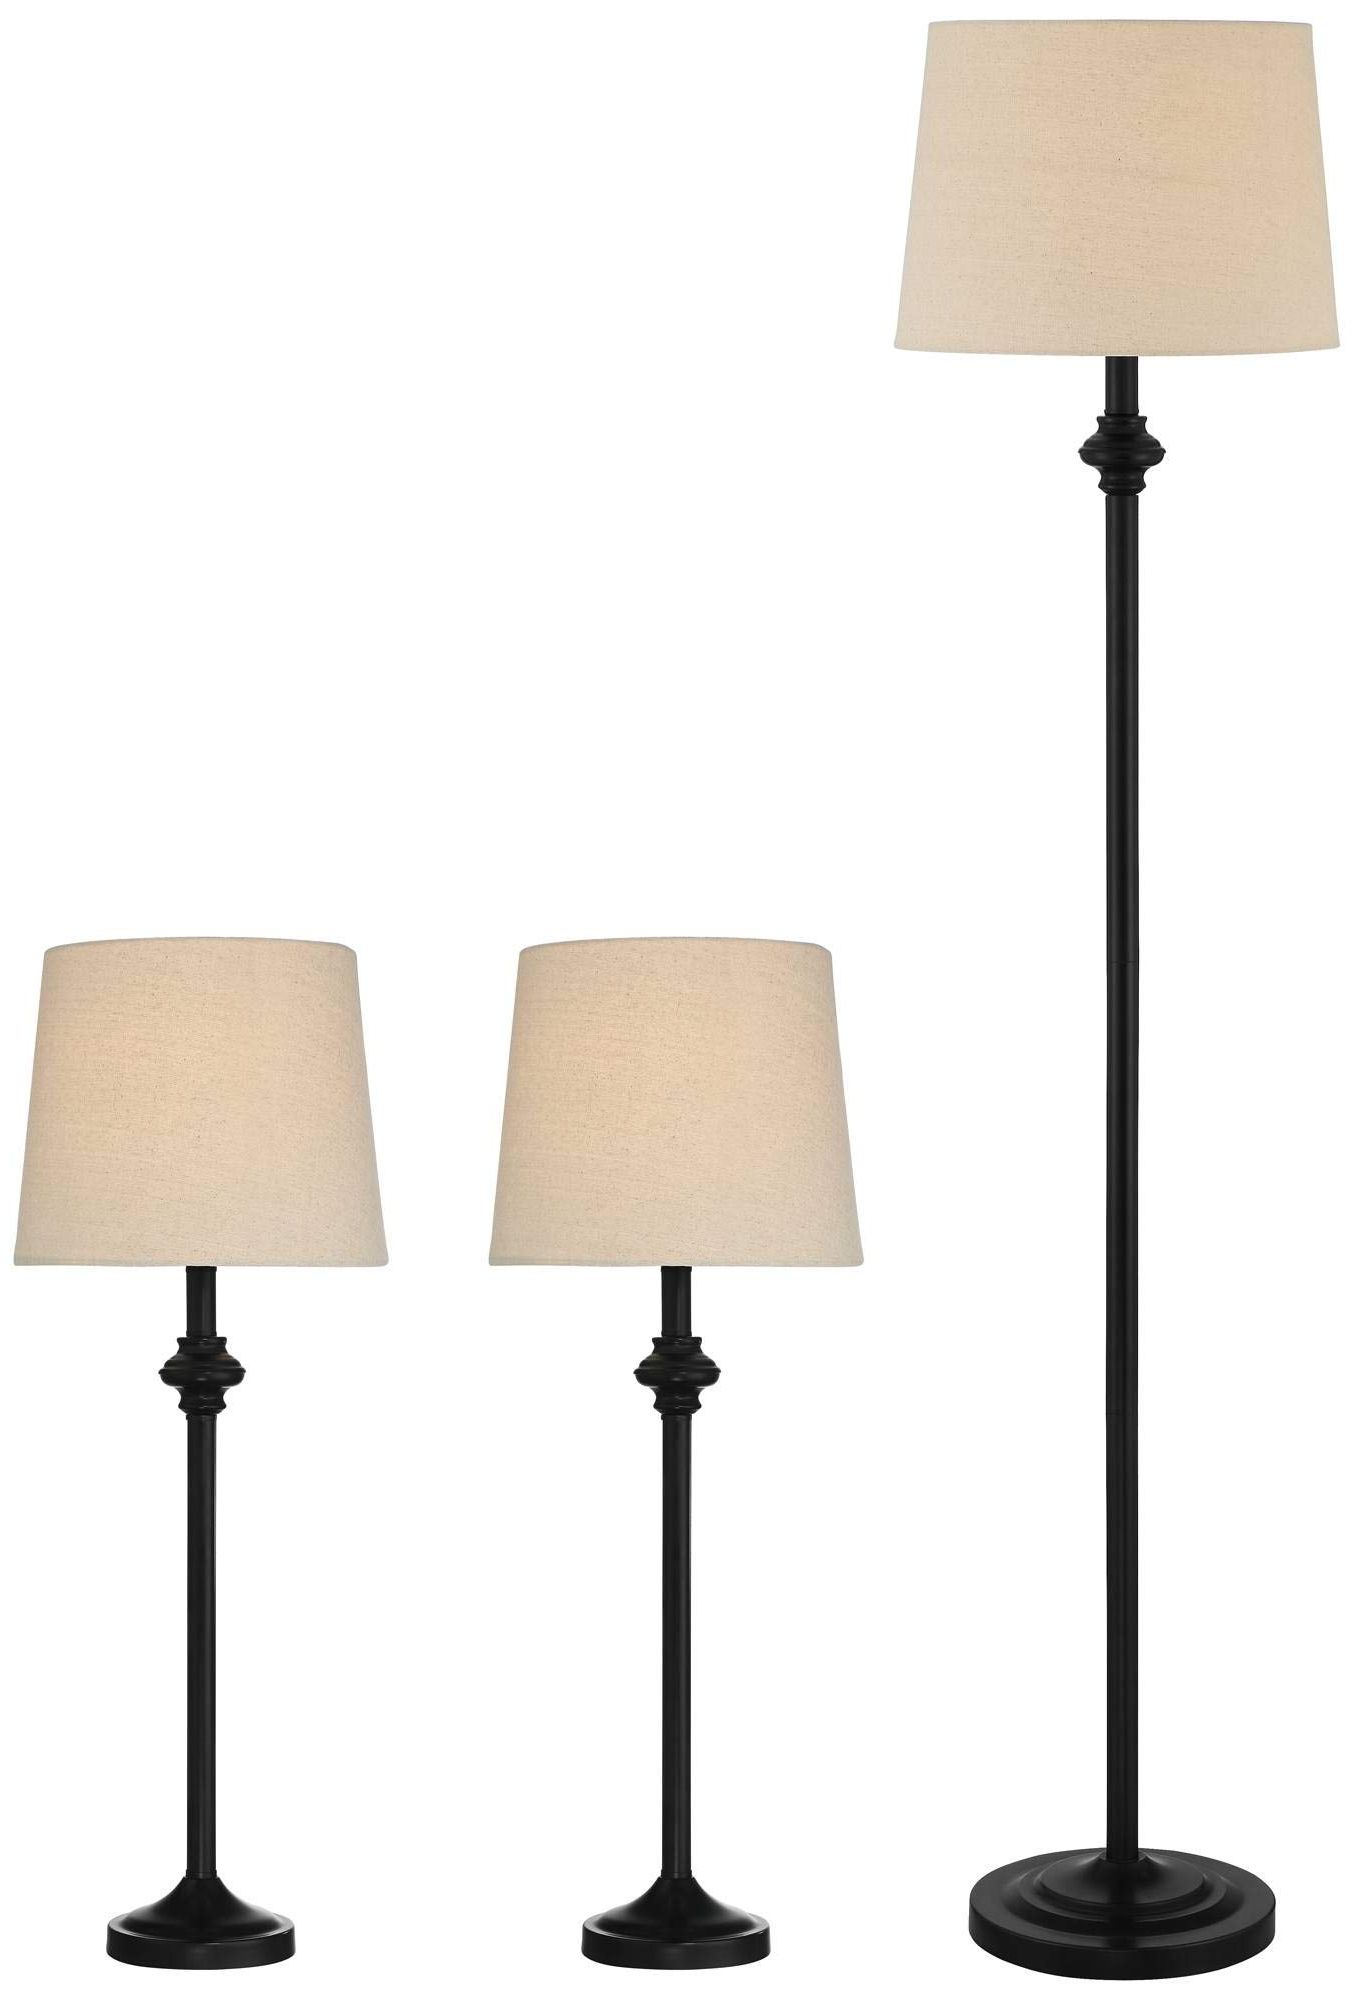 360 Lighting Carter Traditional 3 Piece Table Floor Lamp Set Black Metal  Cream Fabric Tapered Drum Within 2020 3 Piece Set Standing Lamps (View 7 of 15)